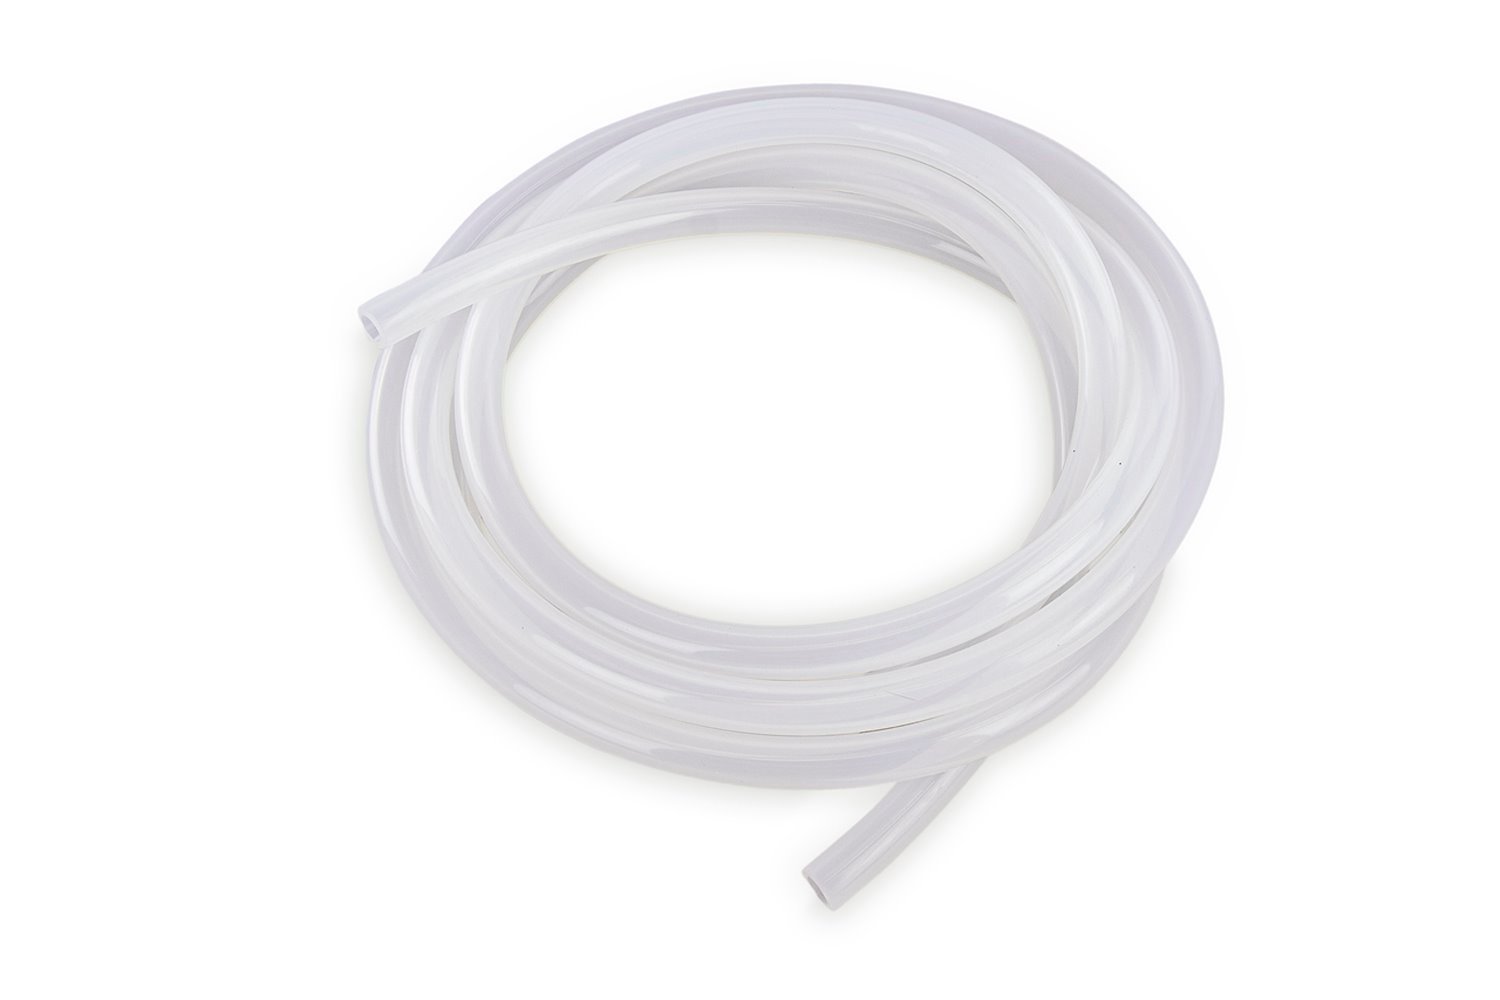 HTSVH35-CLEARx25 High-Temperature Silicone Vacuum Hose Tubing, 3.5 mm ID, 25 ft. Roll, Clear